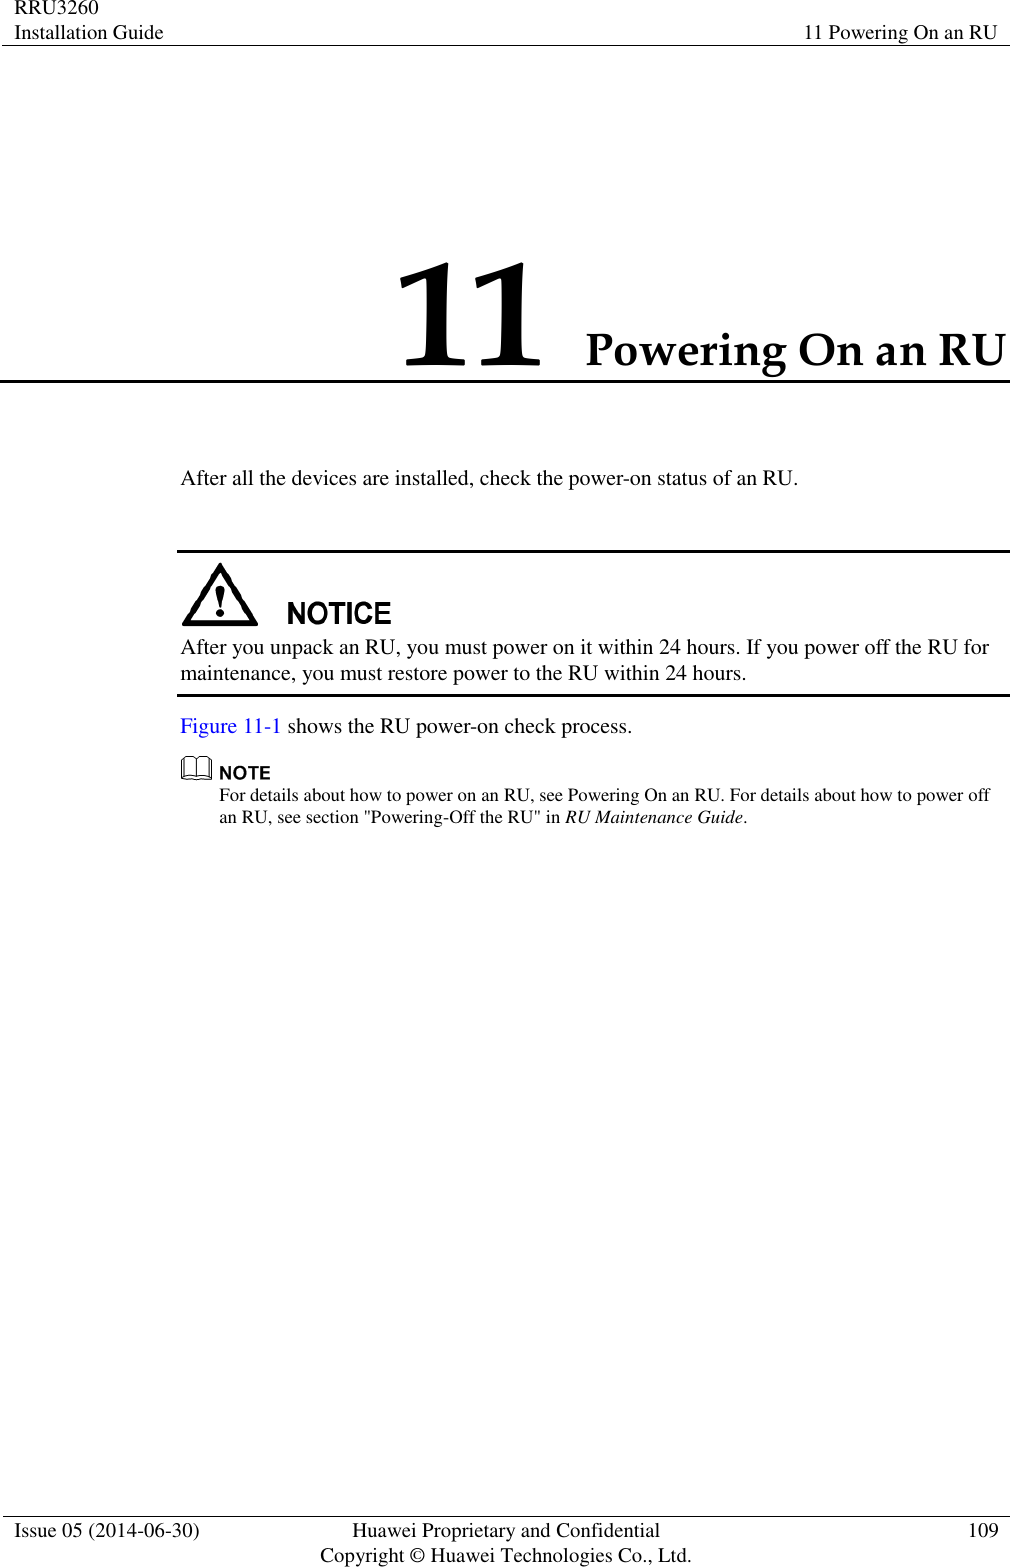 RRU3260 Installation Guide 11 Powering On an RU  Issue 05 (2014-06-30) Huawei Proprietary and Confidential                                     Copyright © Huawei Technologies Co., Ltd. 109  11 Powering On an RU After all the devices are installed, check the power-on status of an RU.   After you unpack an RU, you must power on it within 24 hours. If you power off the RU for maintenance, you must restore power to the RU within 24 hours. Figure 11-1 shows the RU power-on check process.  For details about how to power on an RU, see Powering On an RU. For details about how to power off an RU, see section &quot;Powering-Off the RU&quot; in RU Maintenance Guide. 